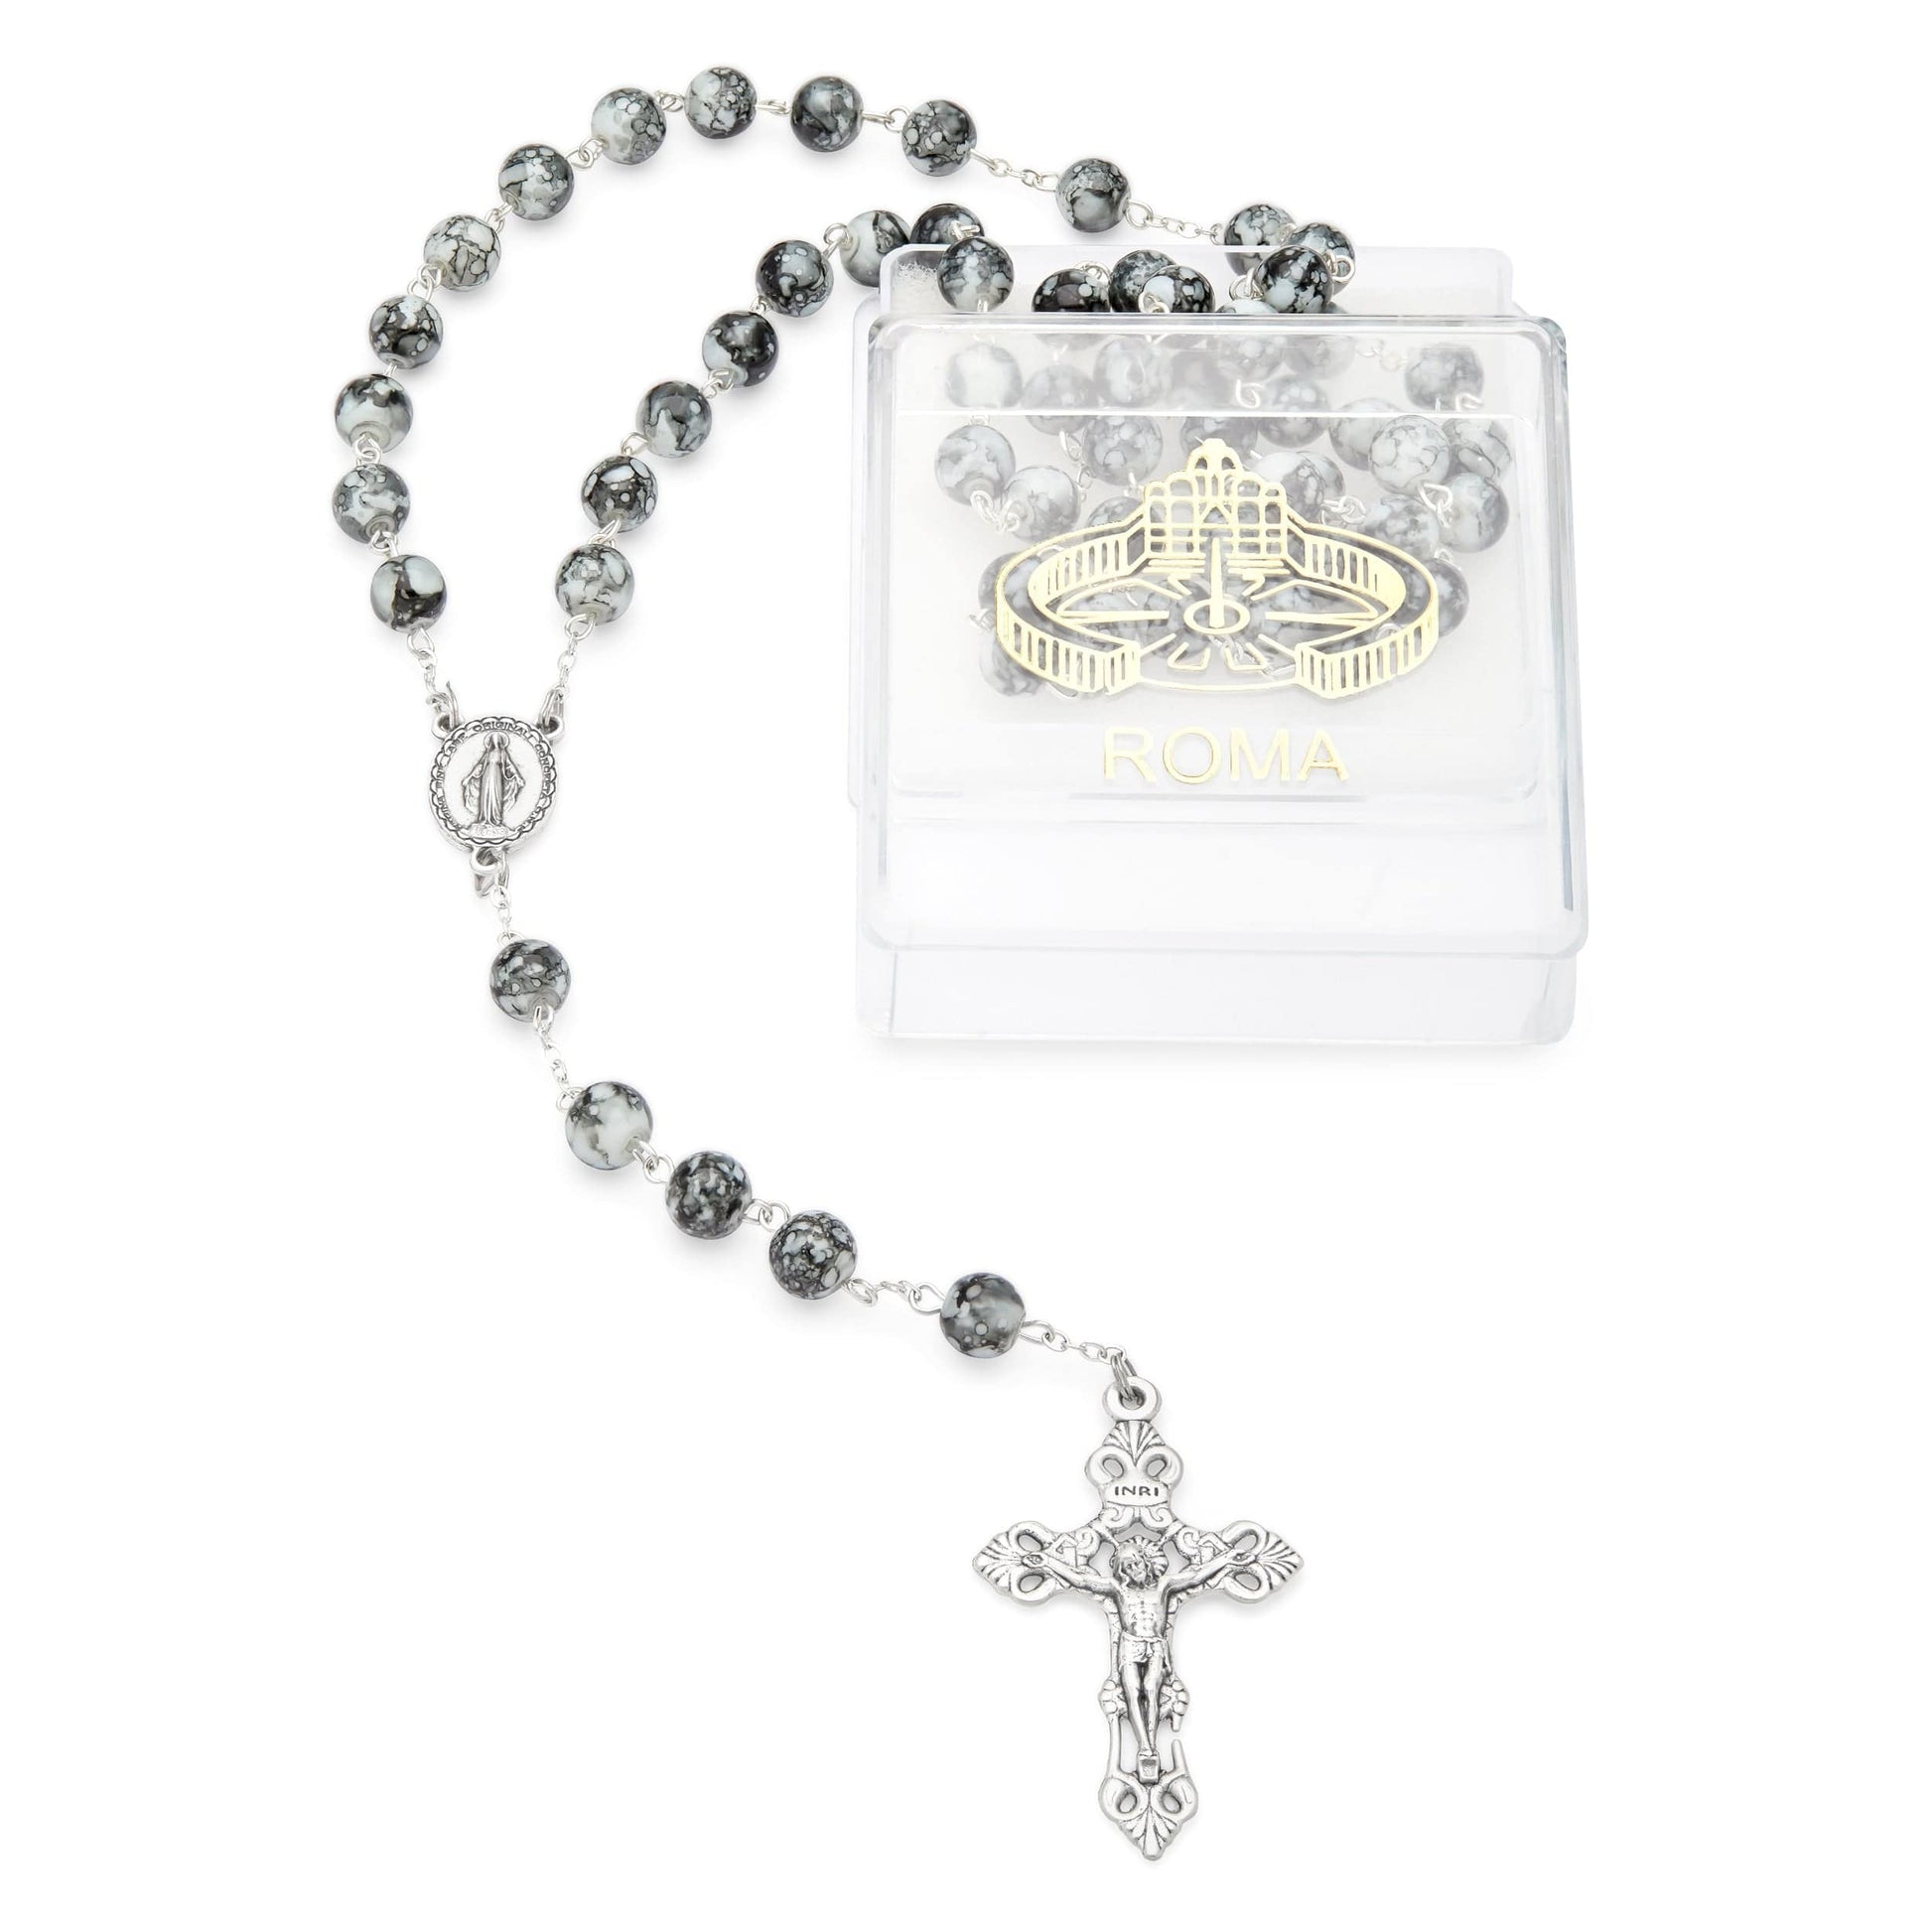 MONDO CATTOLICO Prayer Beads 55 cm (21.65 in) / 8 mm (0.3 in) Black Marble Glass Rosary and Case